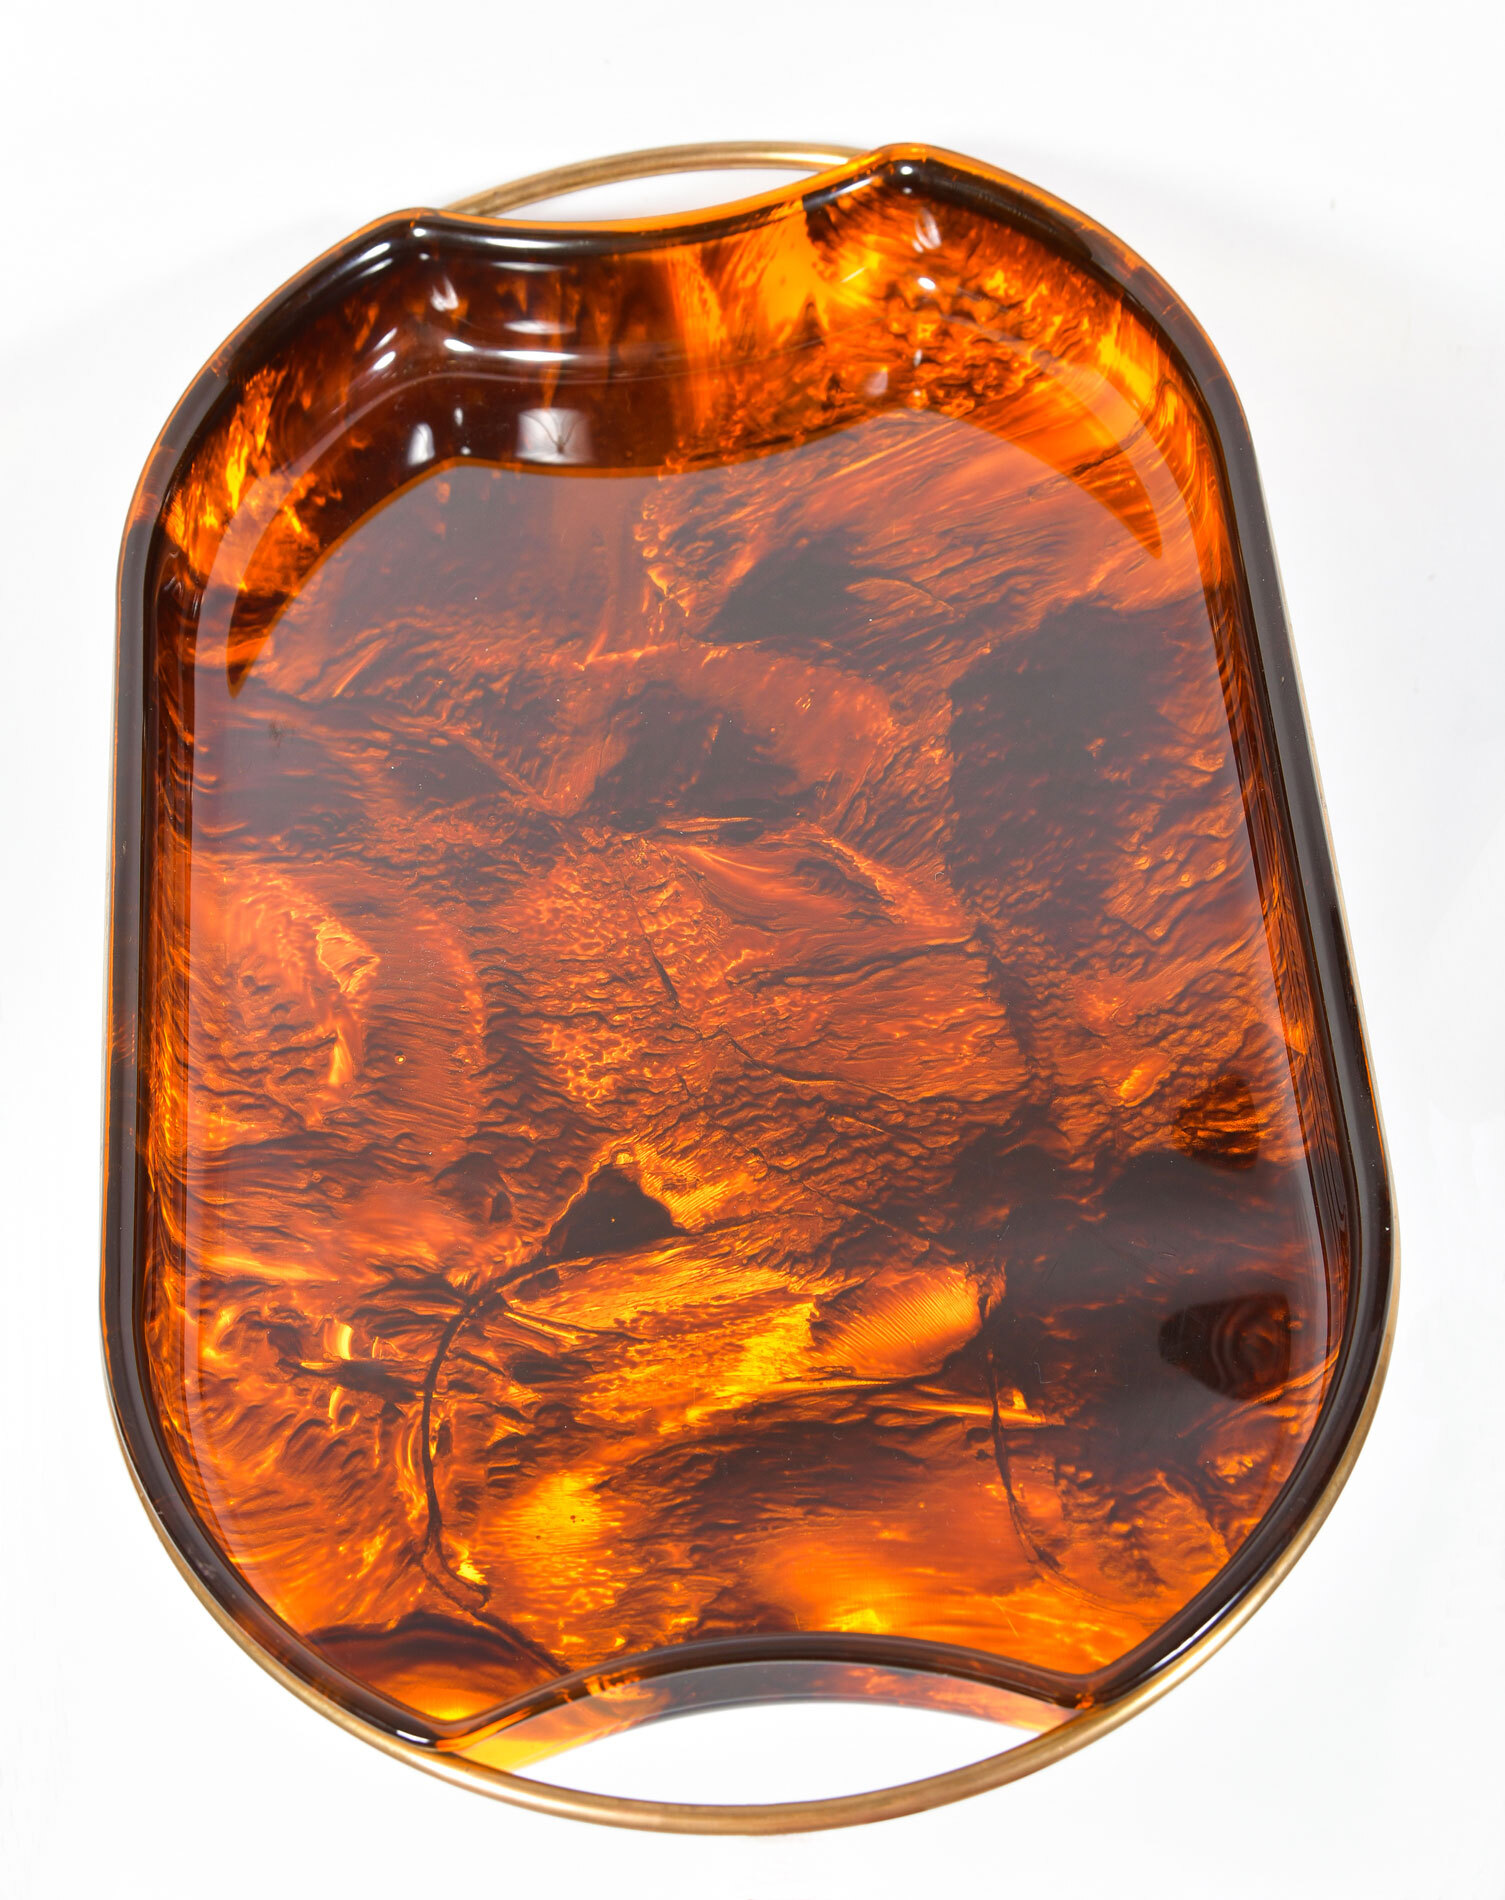 The image for Faux Tortoise Shell Tray 06